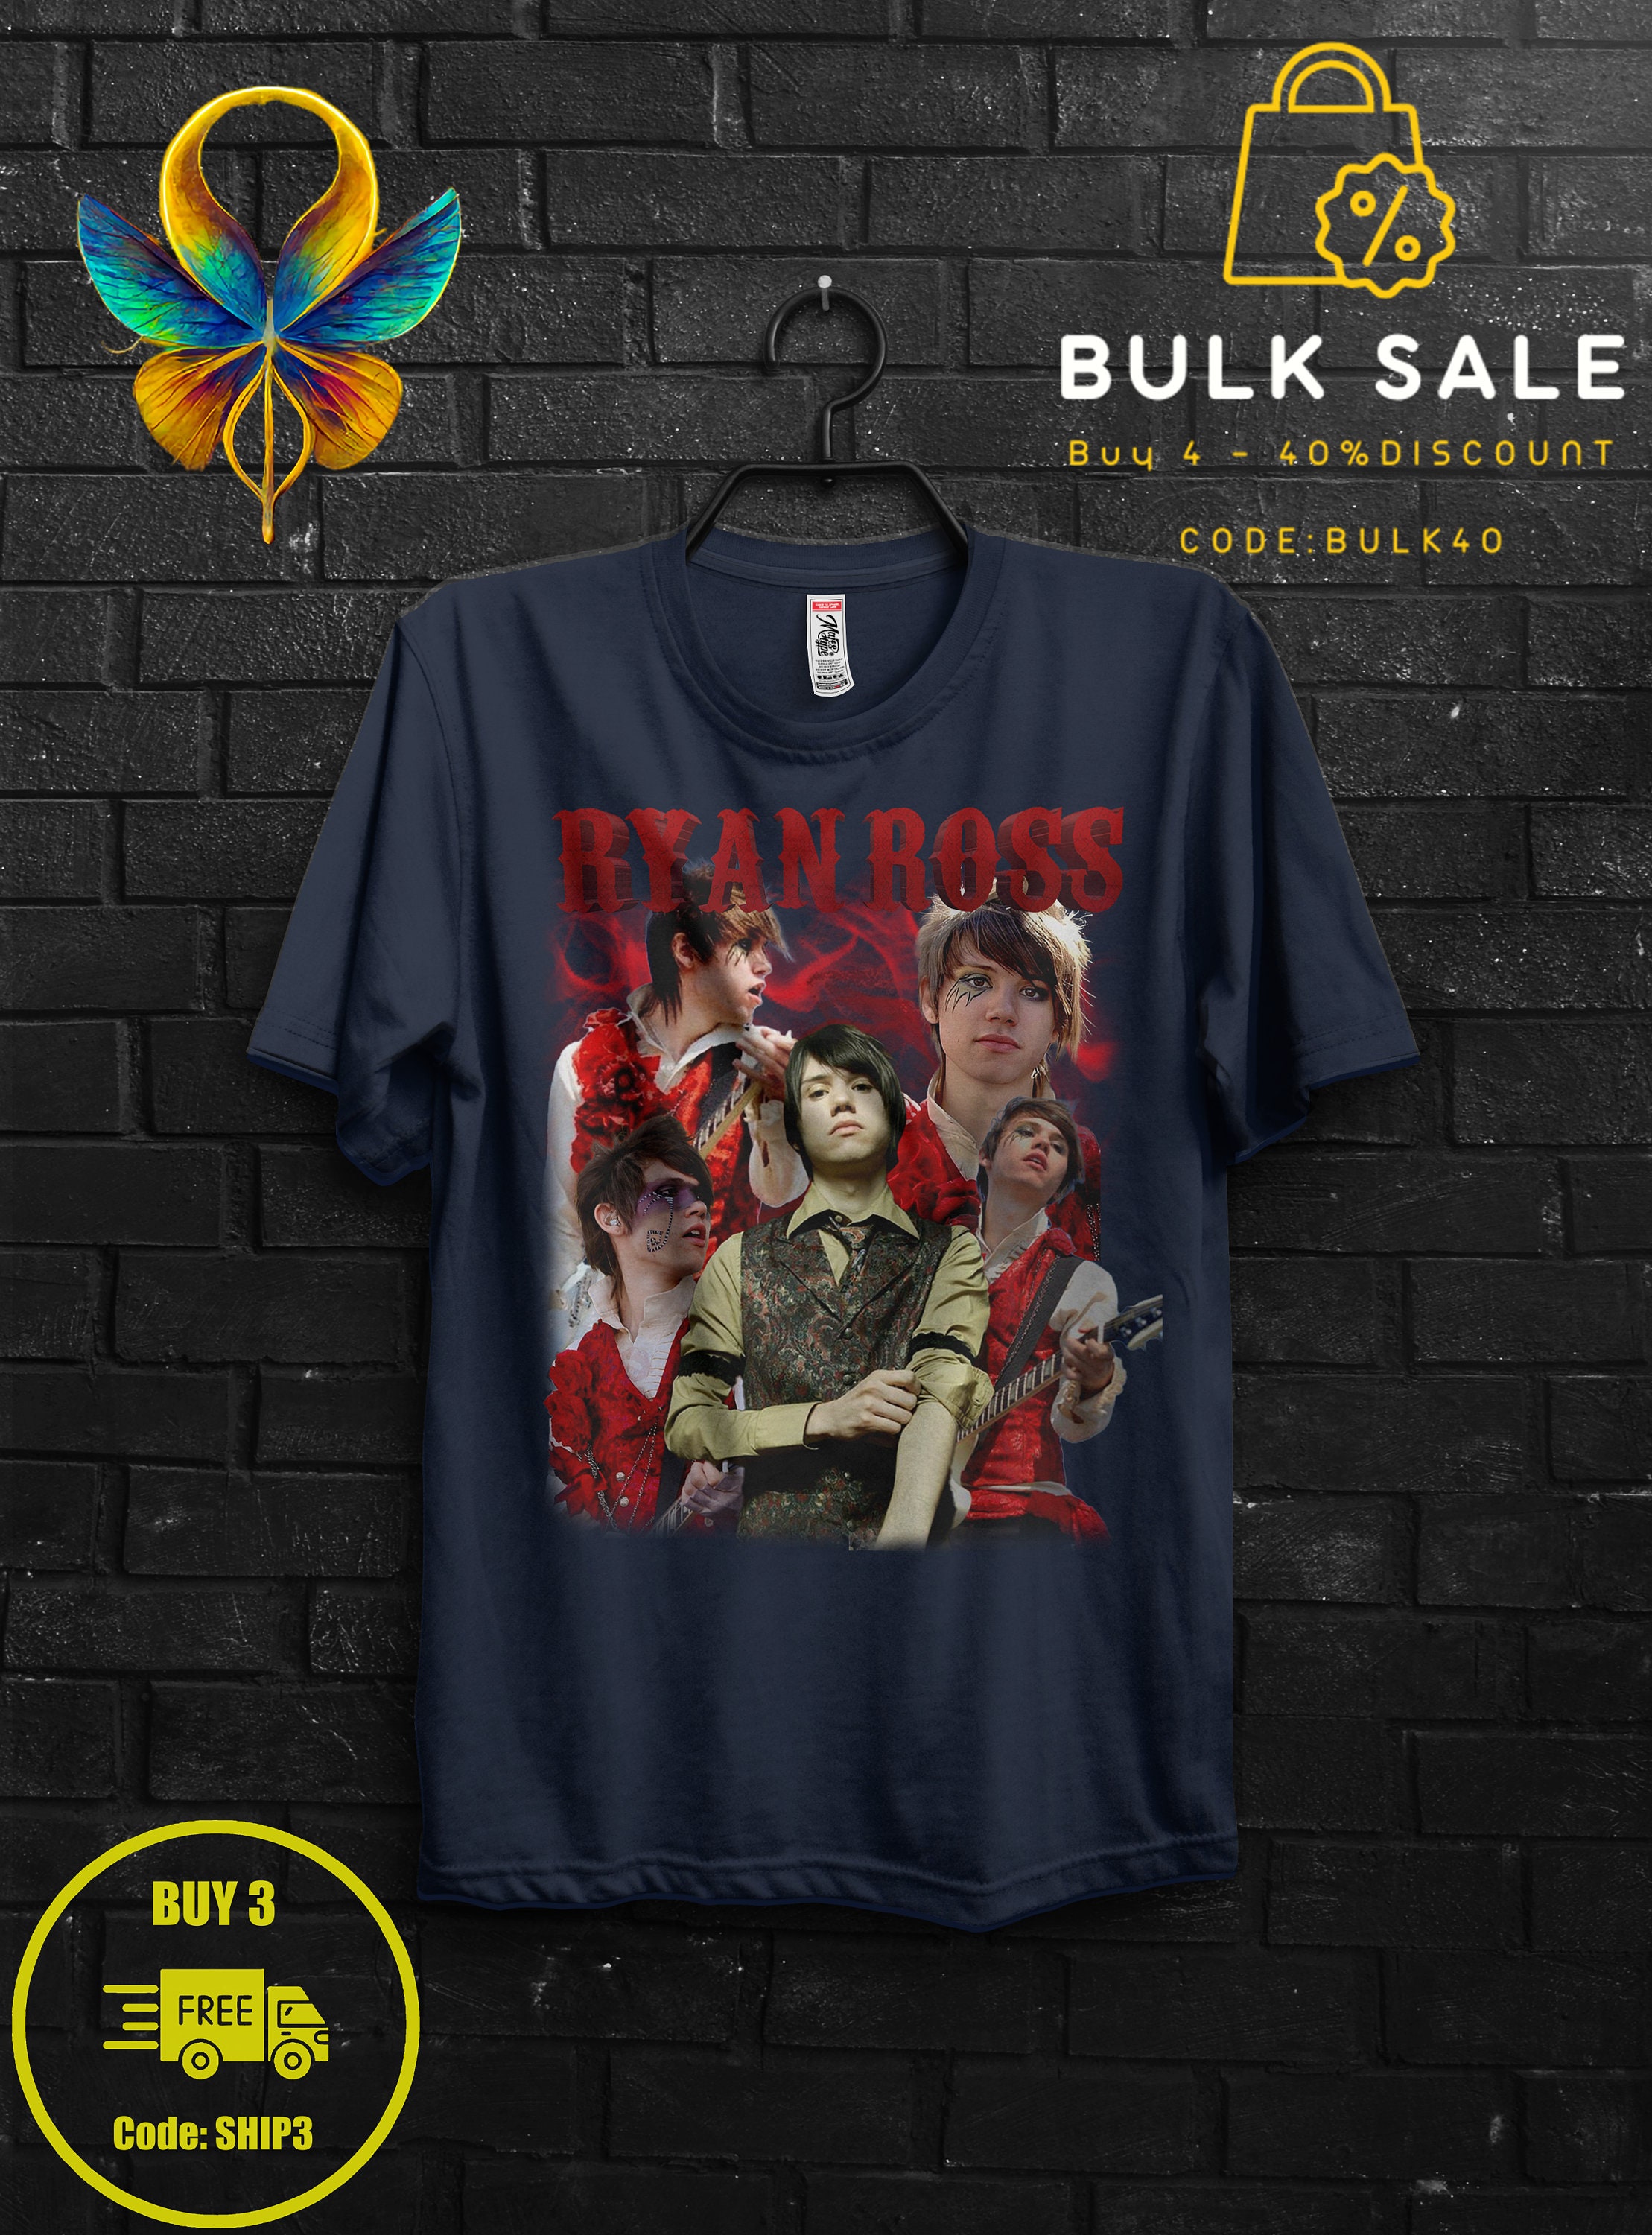 Ryan Ross Fan Gift TShirt,The Young Veins Emo Tee,Brendon Urie and John Walker Shirt,Too Weird To Live Band,Widespread Panic,Afycso Appareal 1546759224